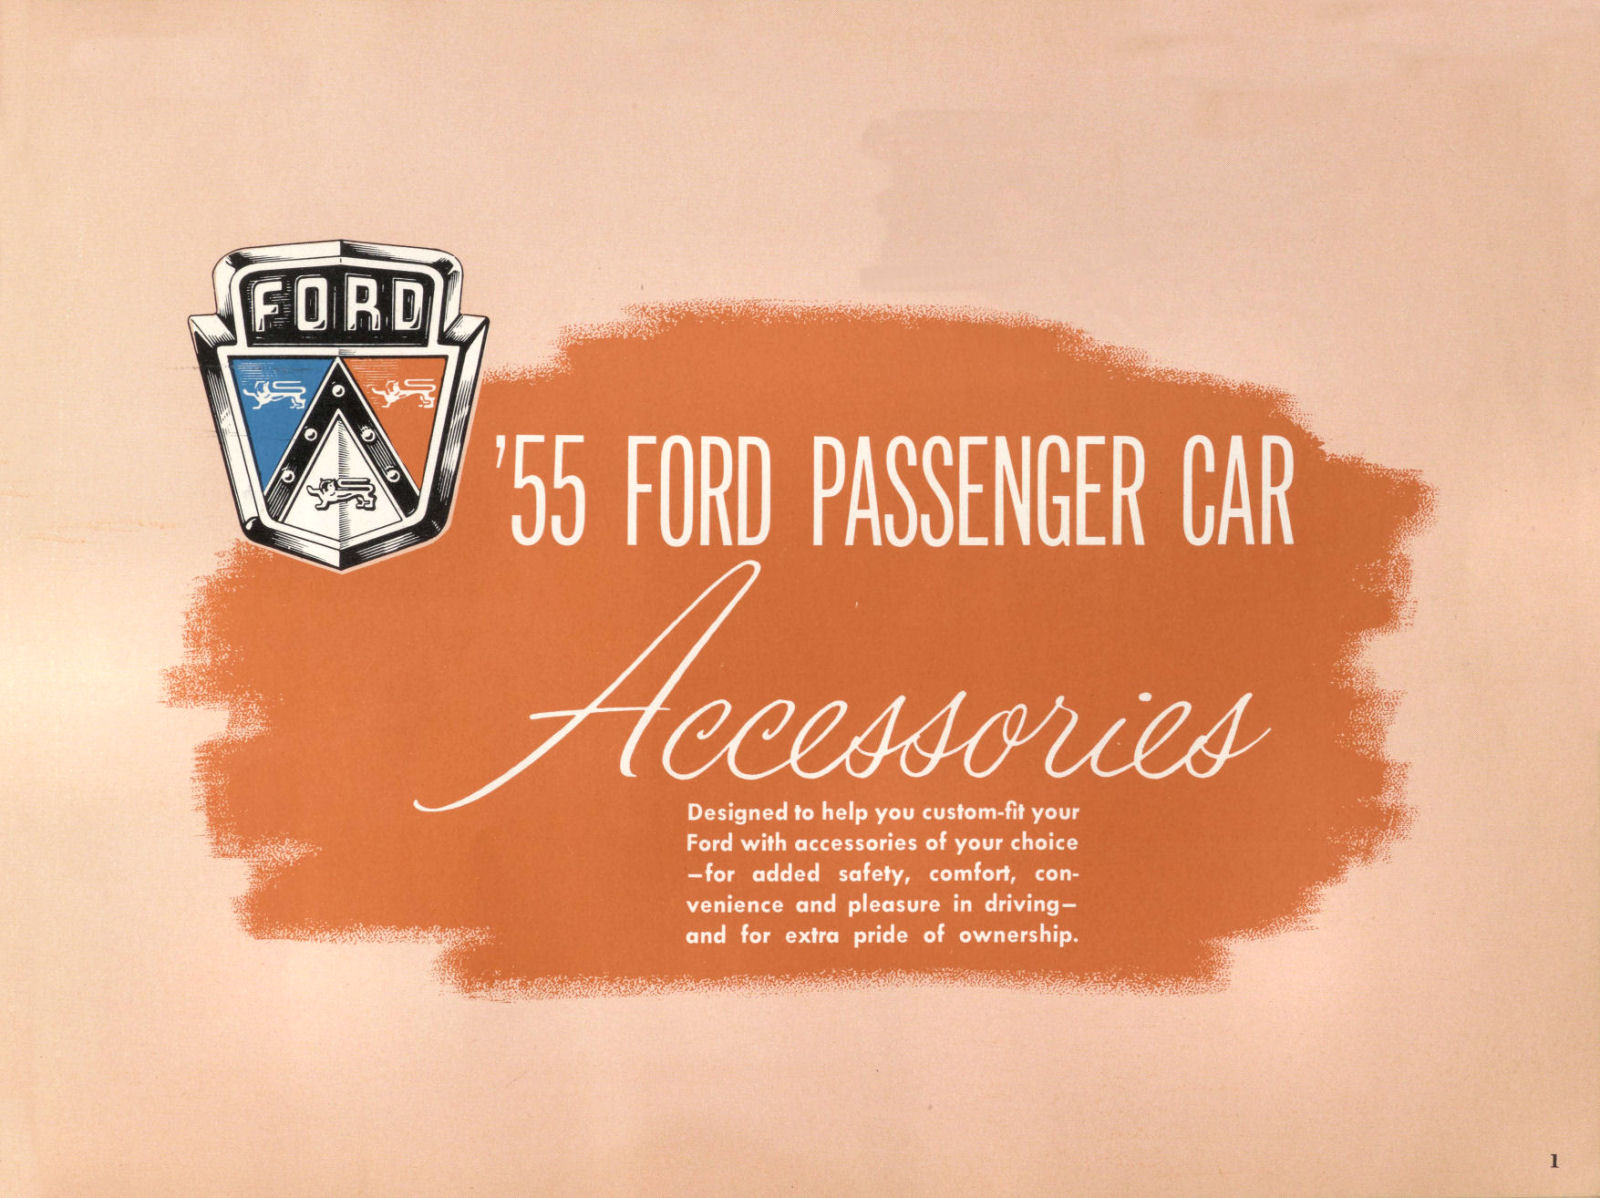 1955 Ford Accessories-01